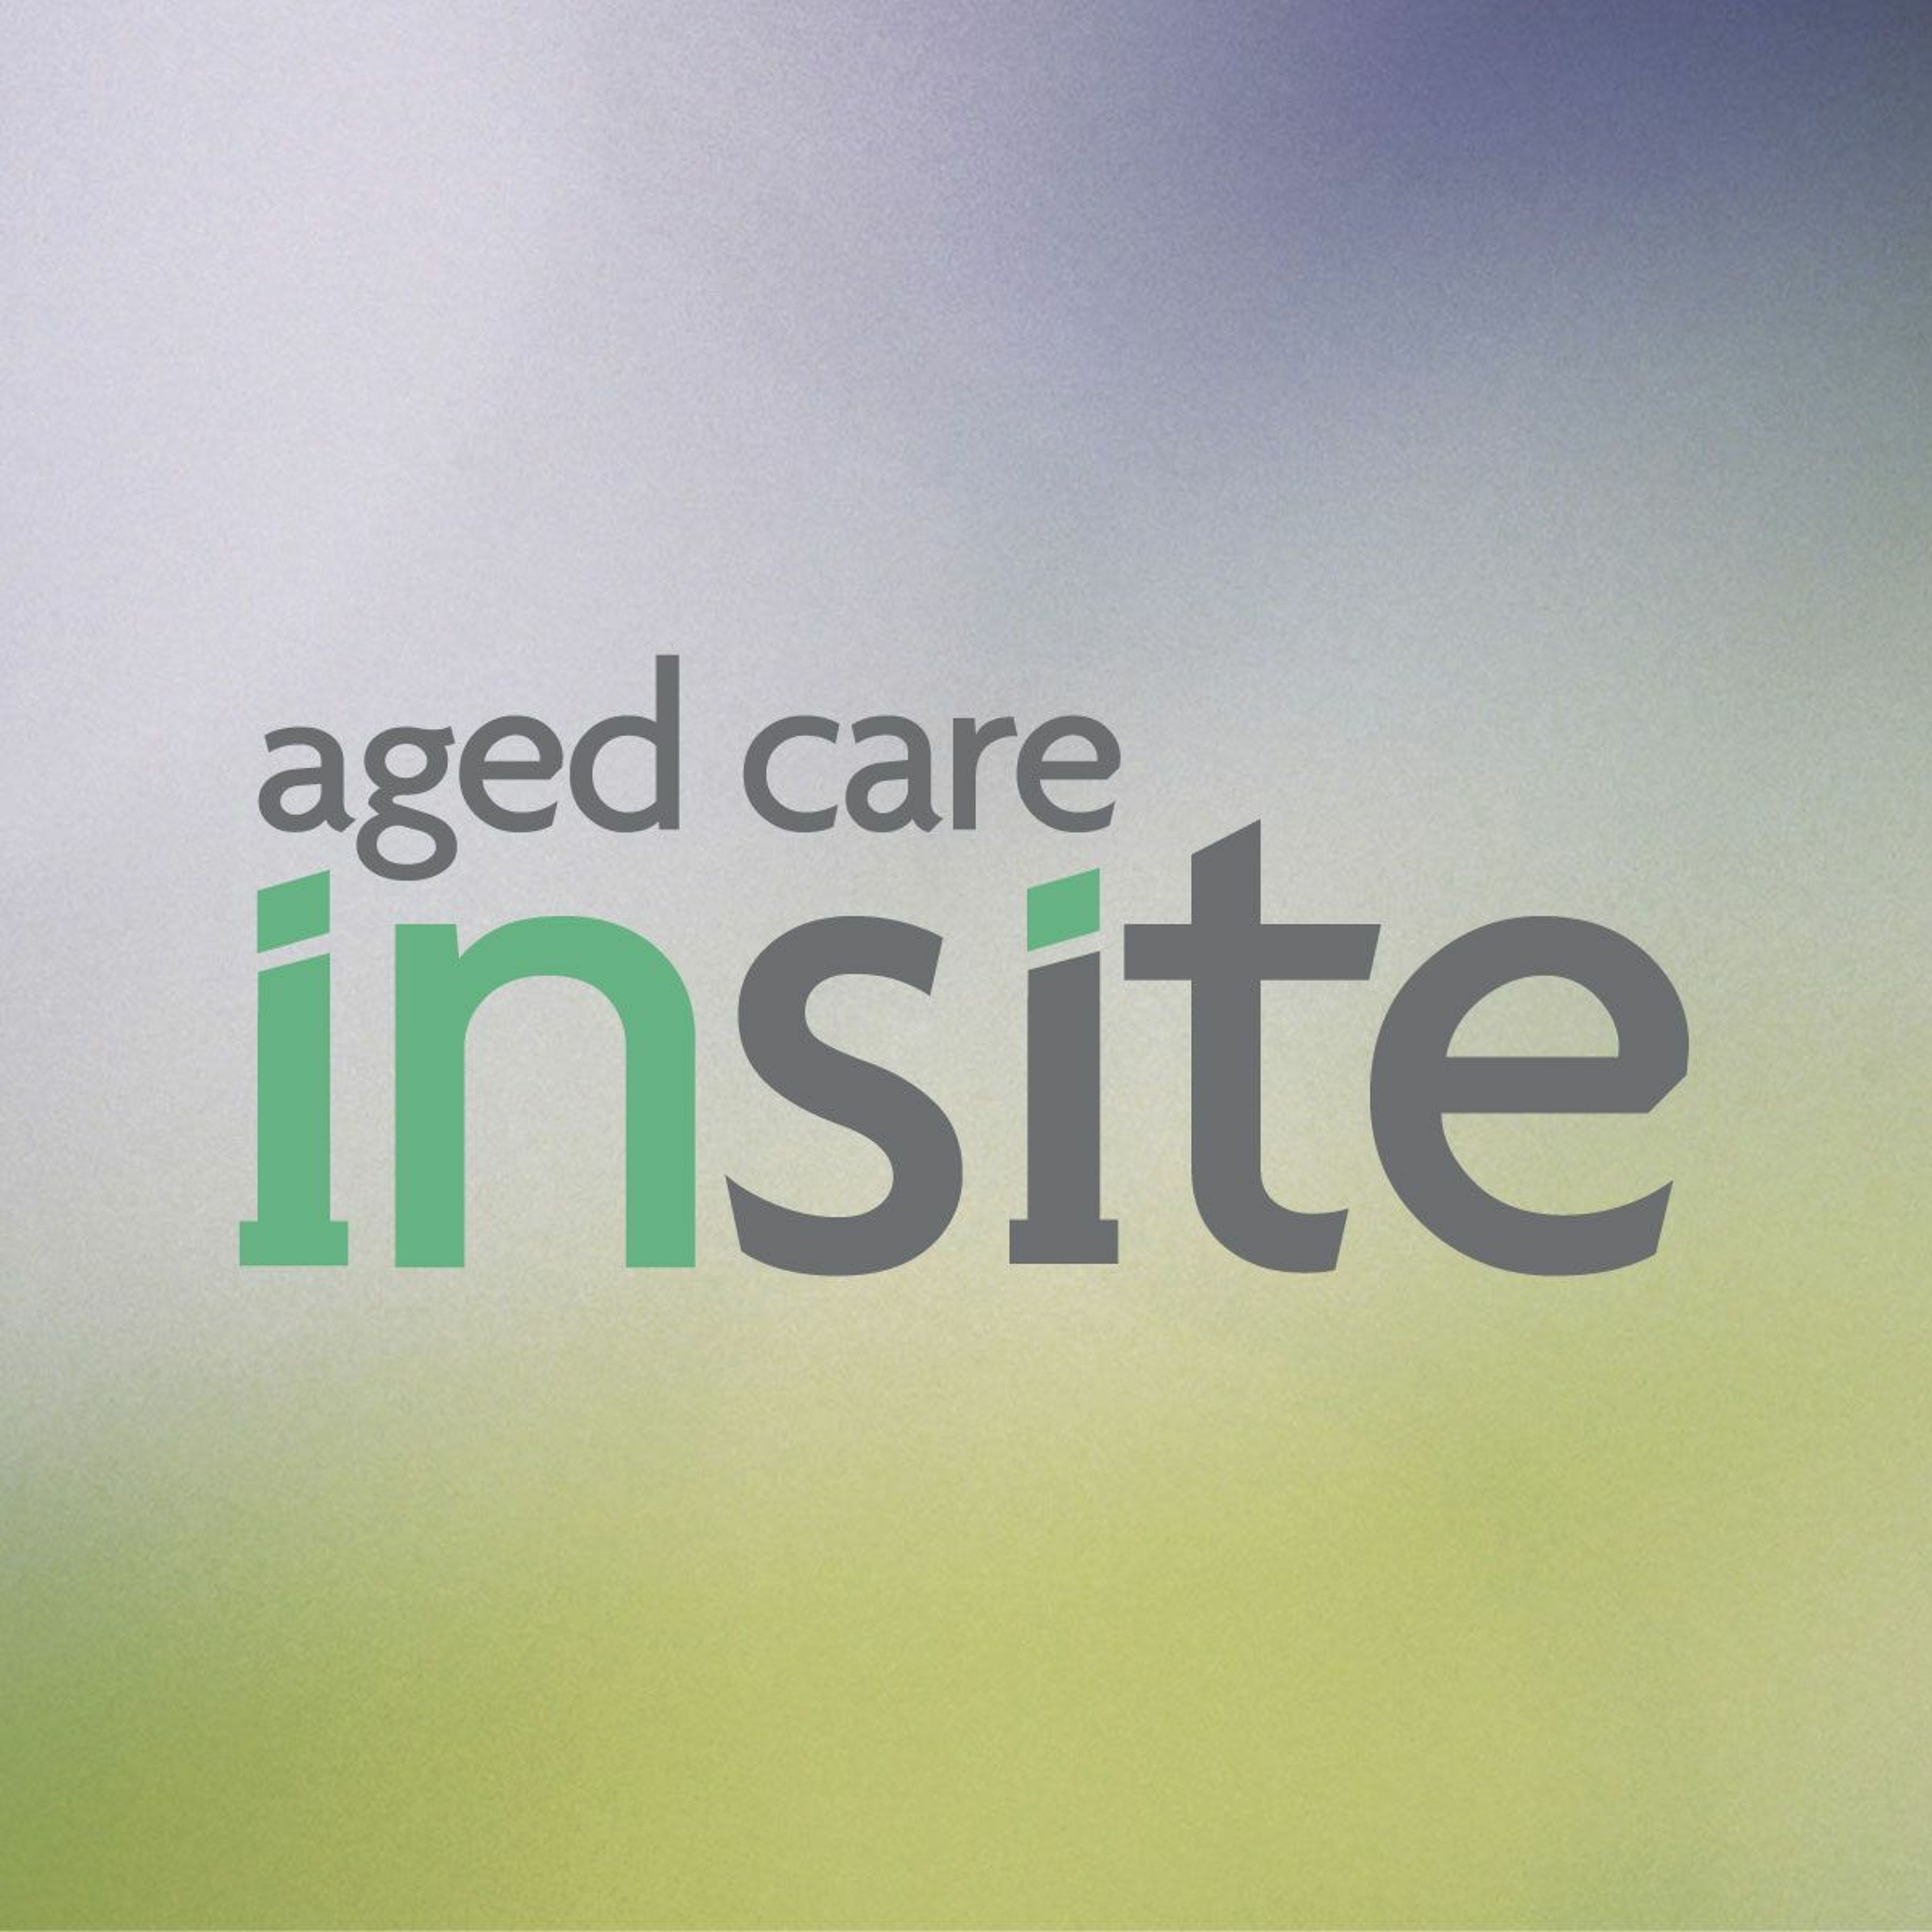 How can we be culturally and linguistically safe in aged care?